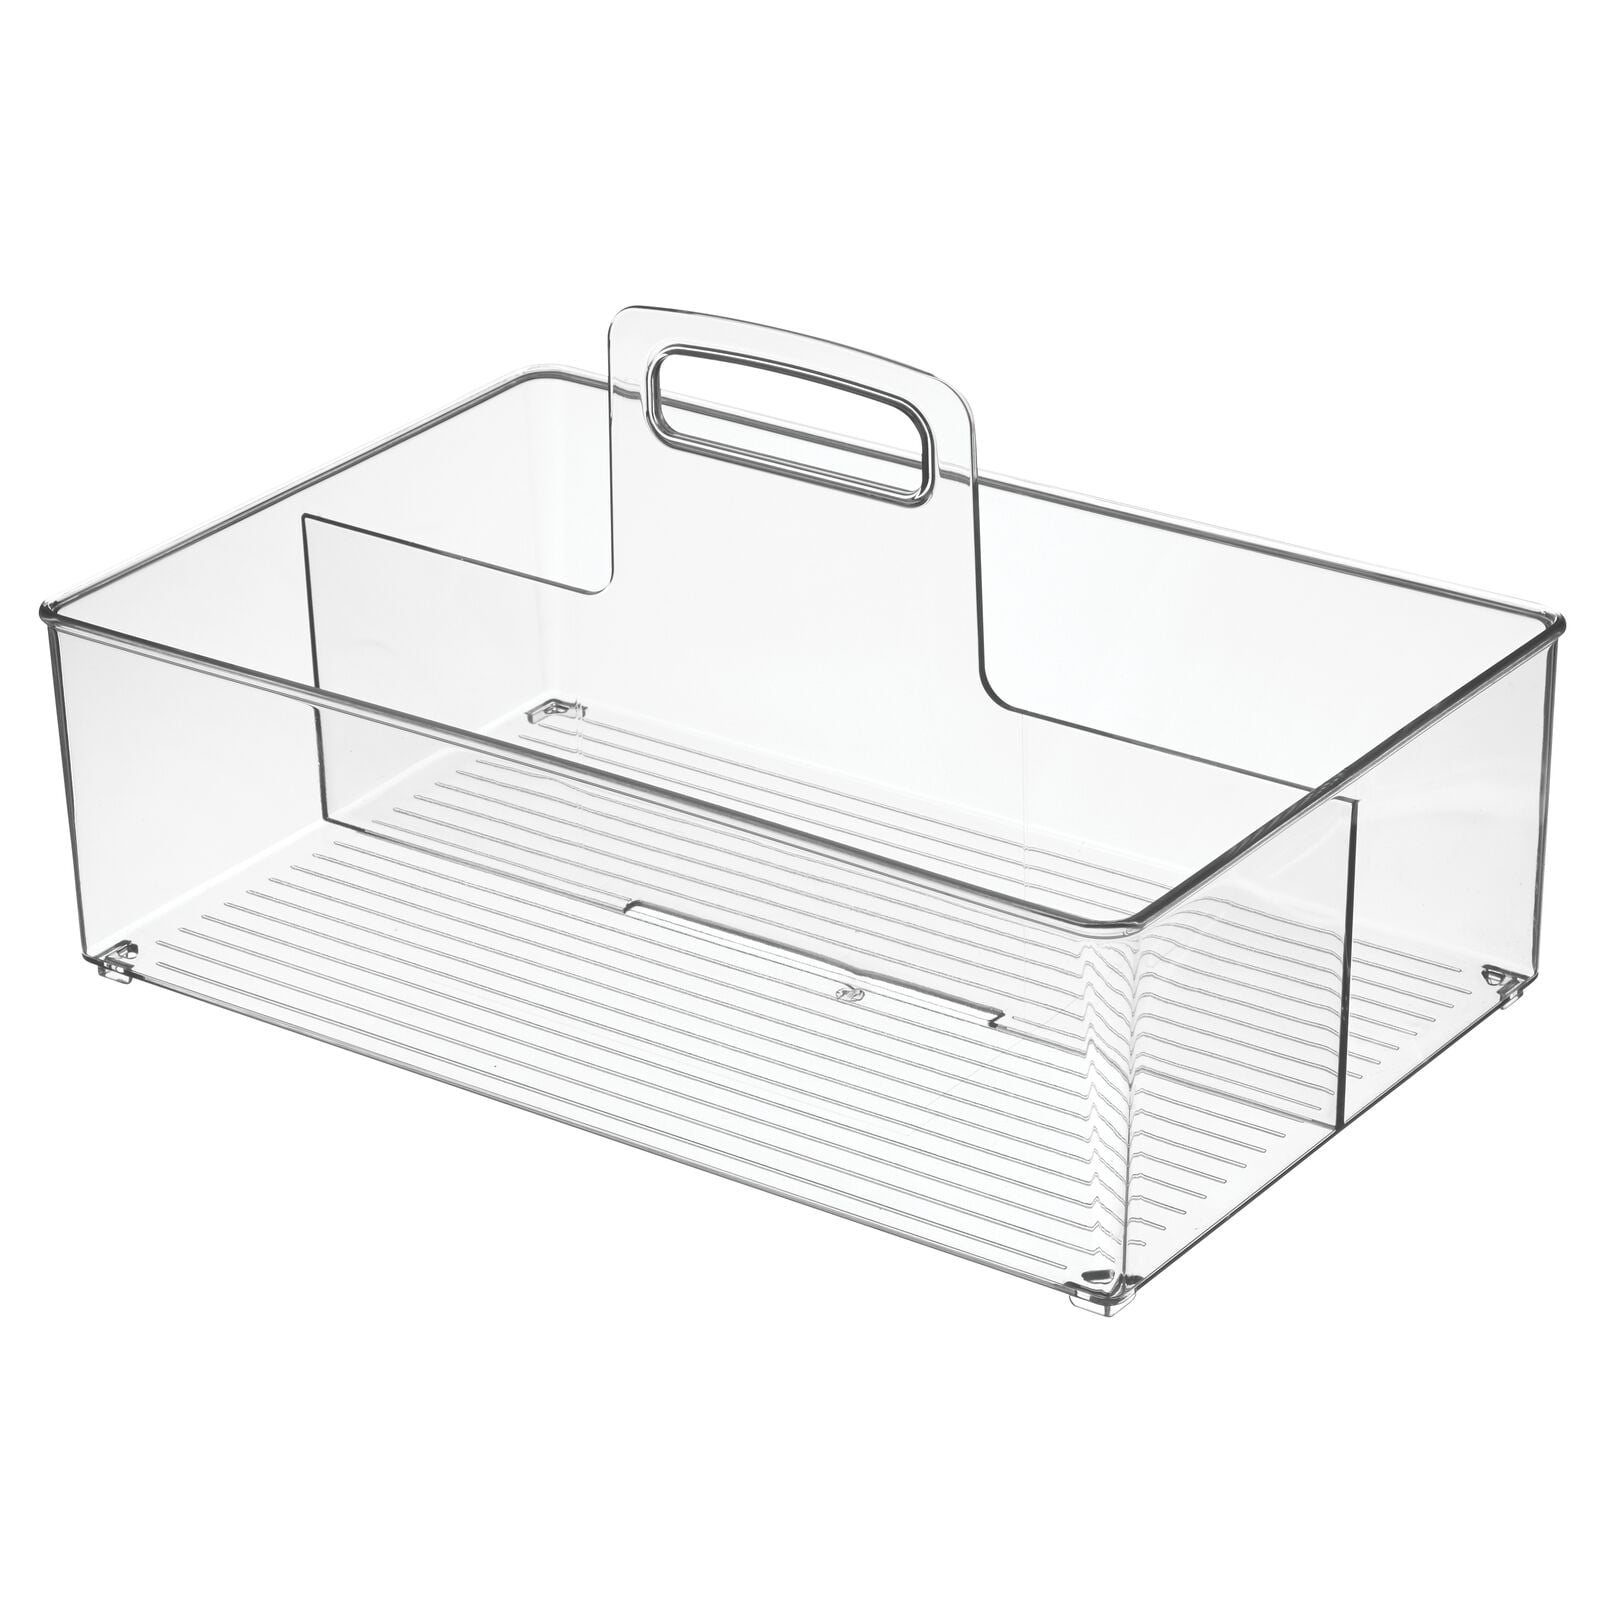 Practical Plastic Tray with Handles for ... mDesign Set of 2 Kitchen Organiser 